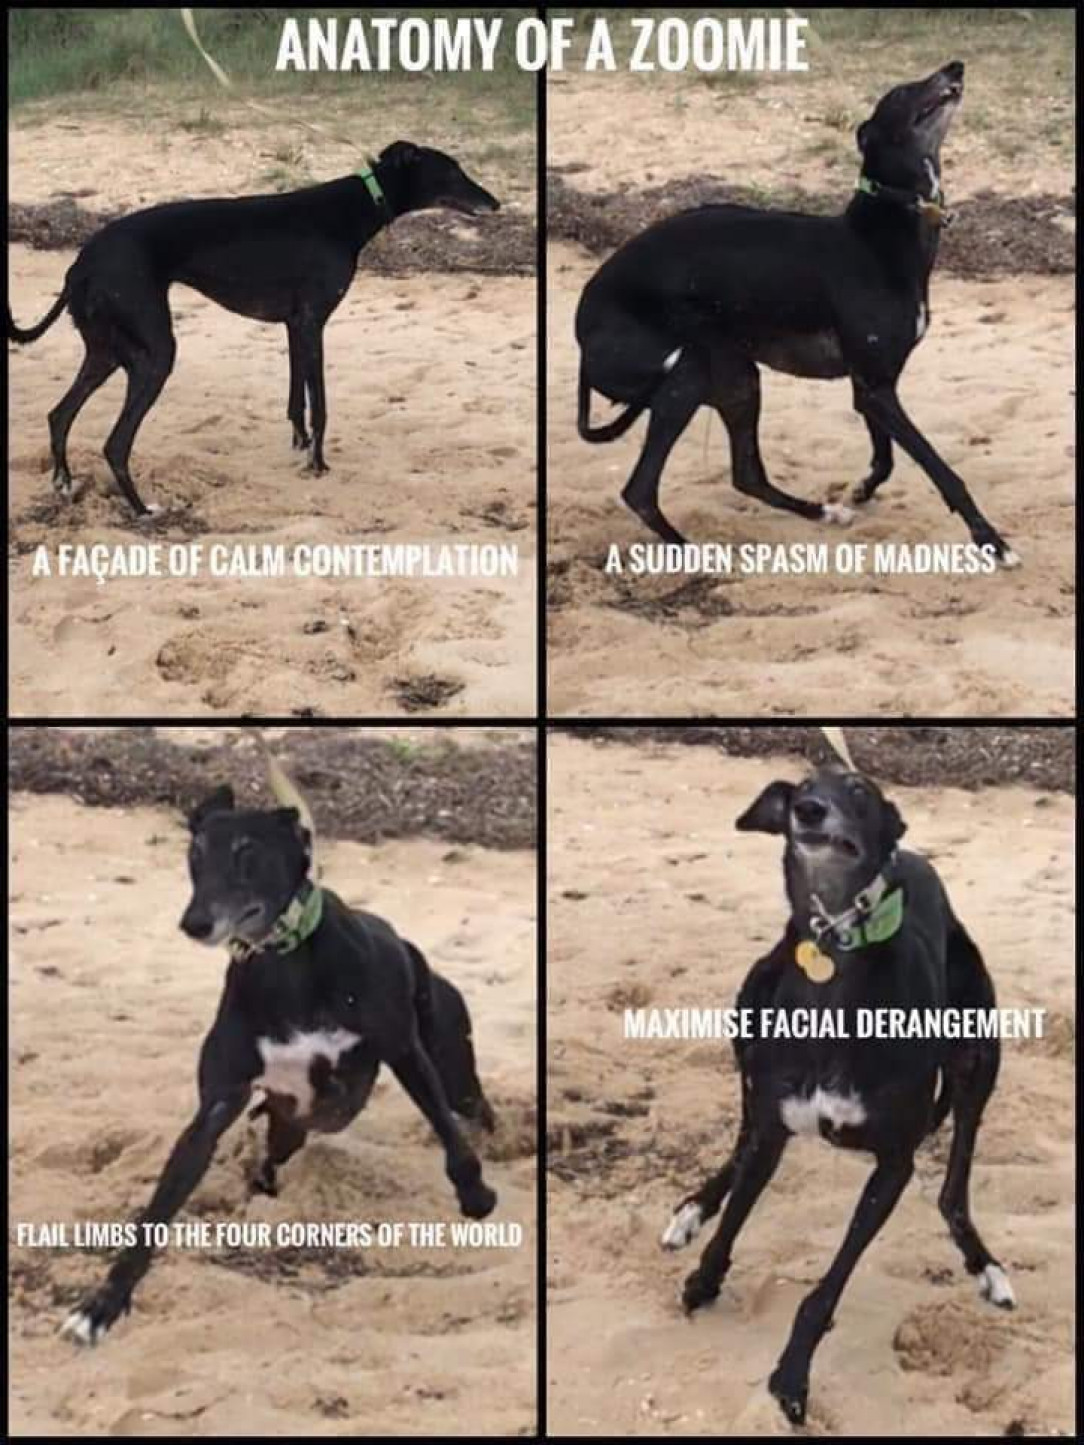 Anatomy of a zoomie